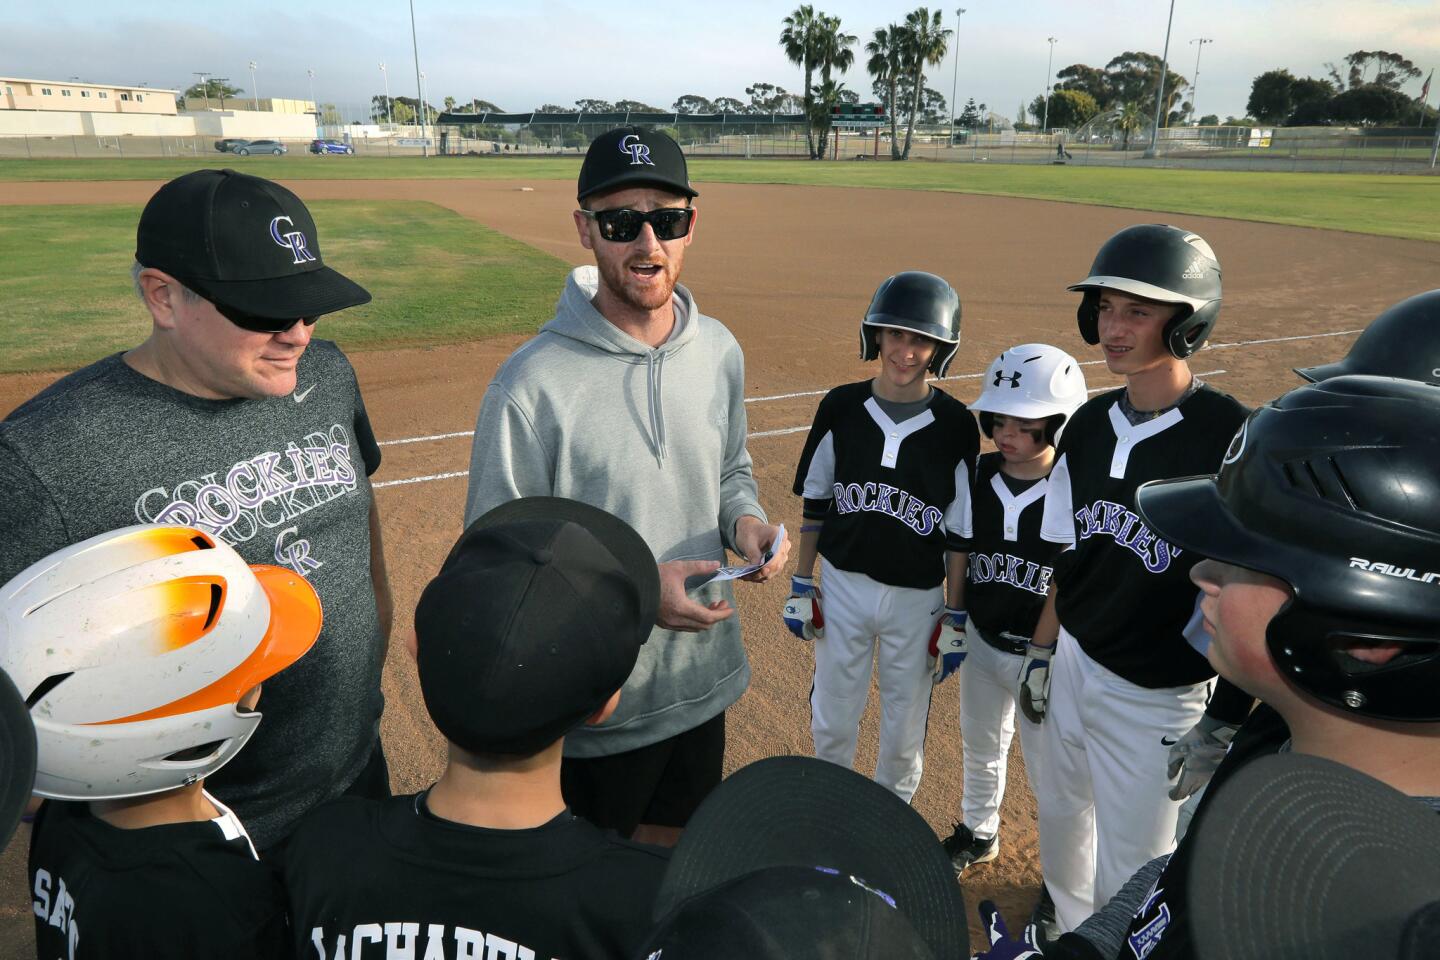 It's time to play ball in California District 42 Little League